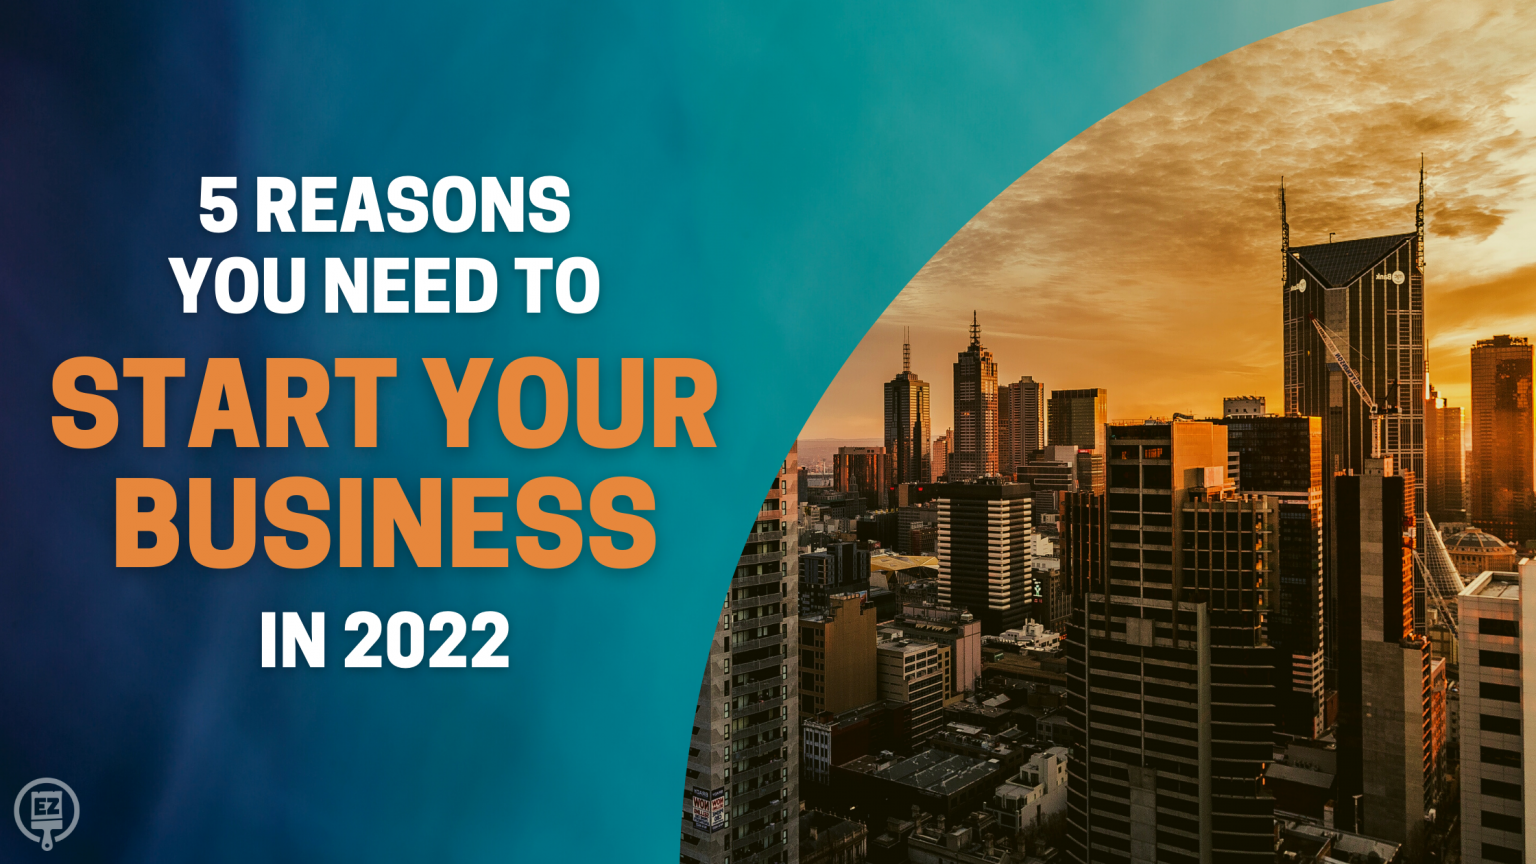 5 Reasons You Need to Start Your Business in 2022